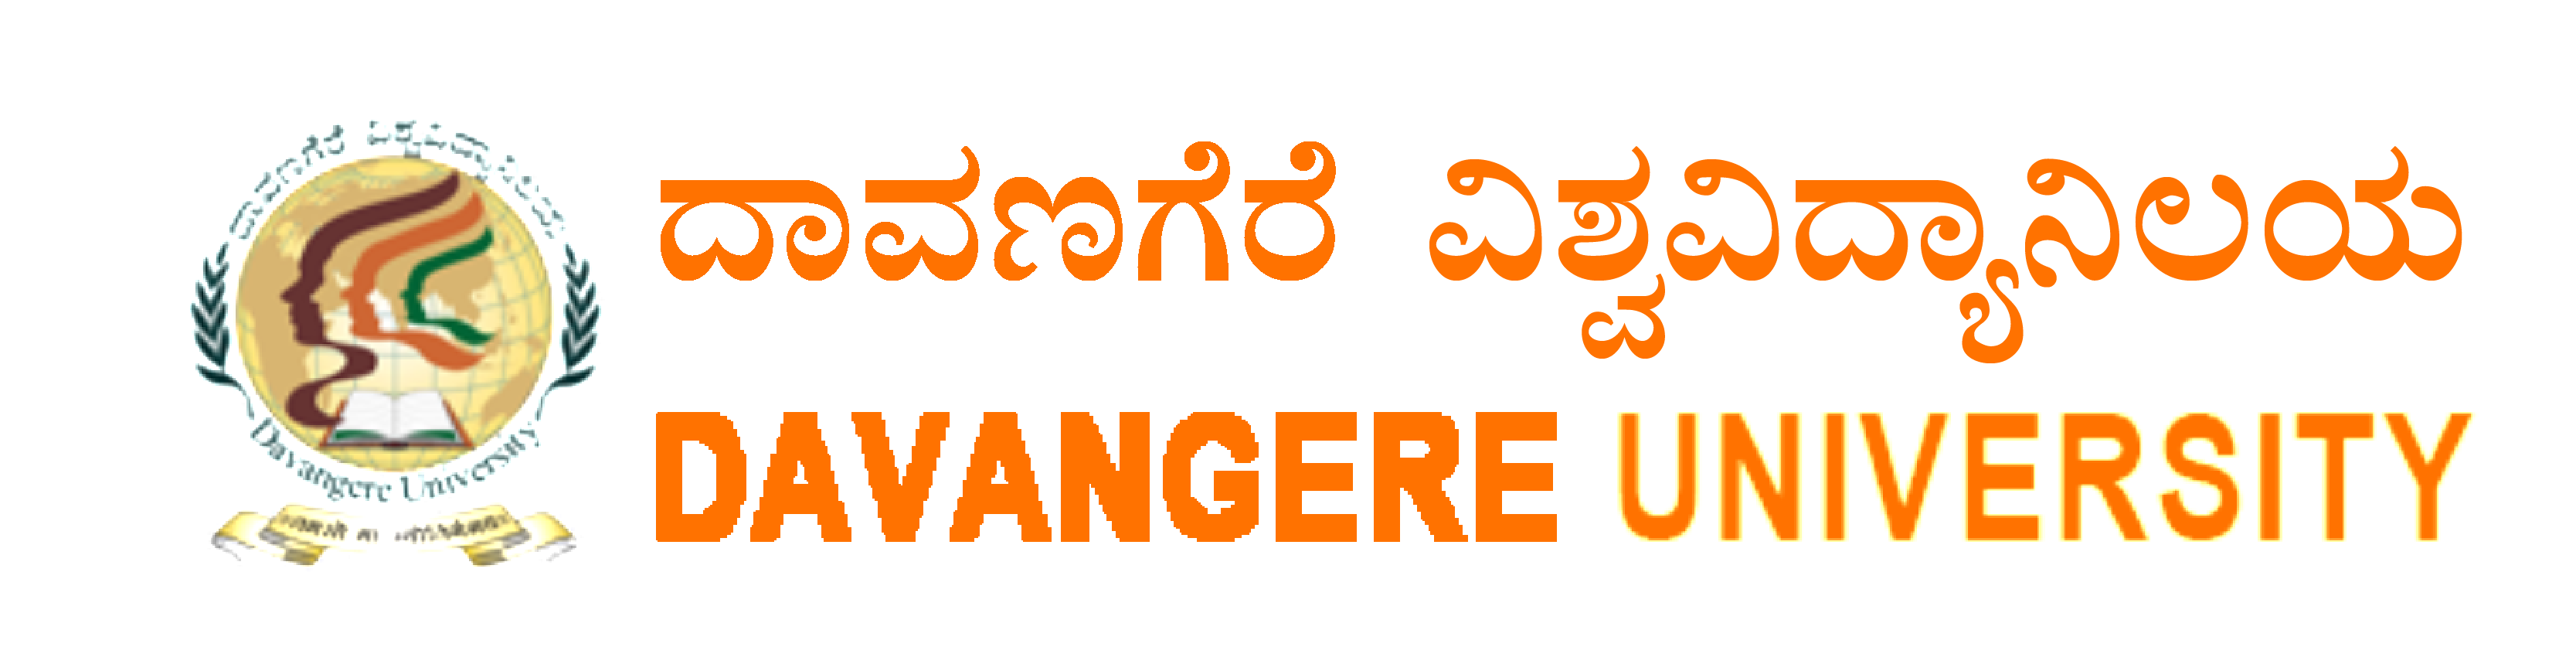 Davanagere University Result [year] - Download Results here, Score Cards 1